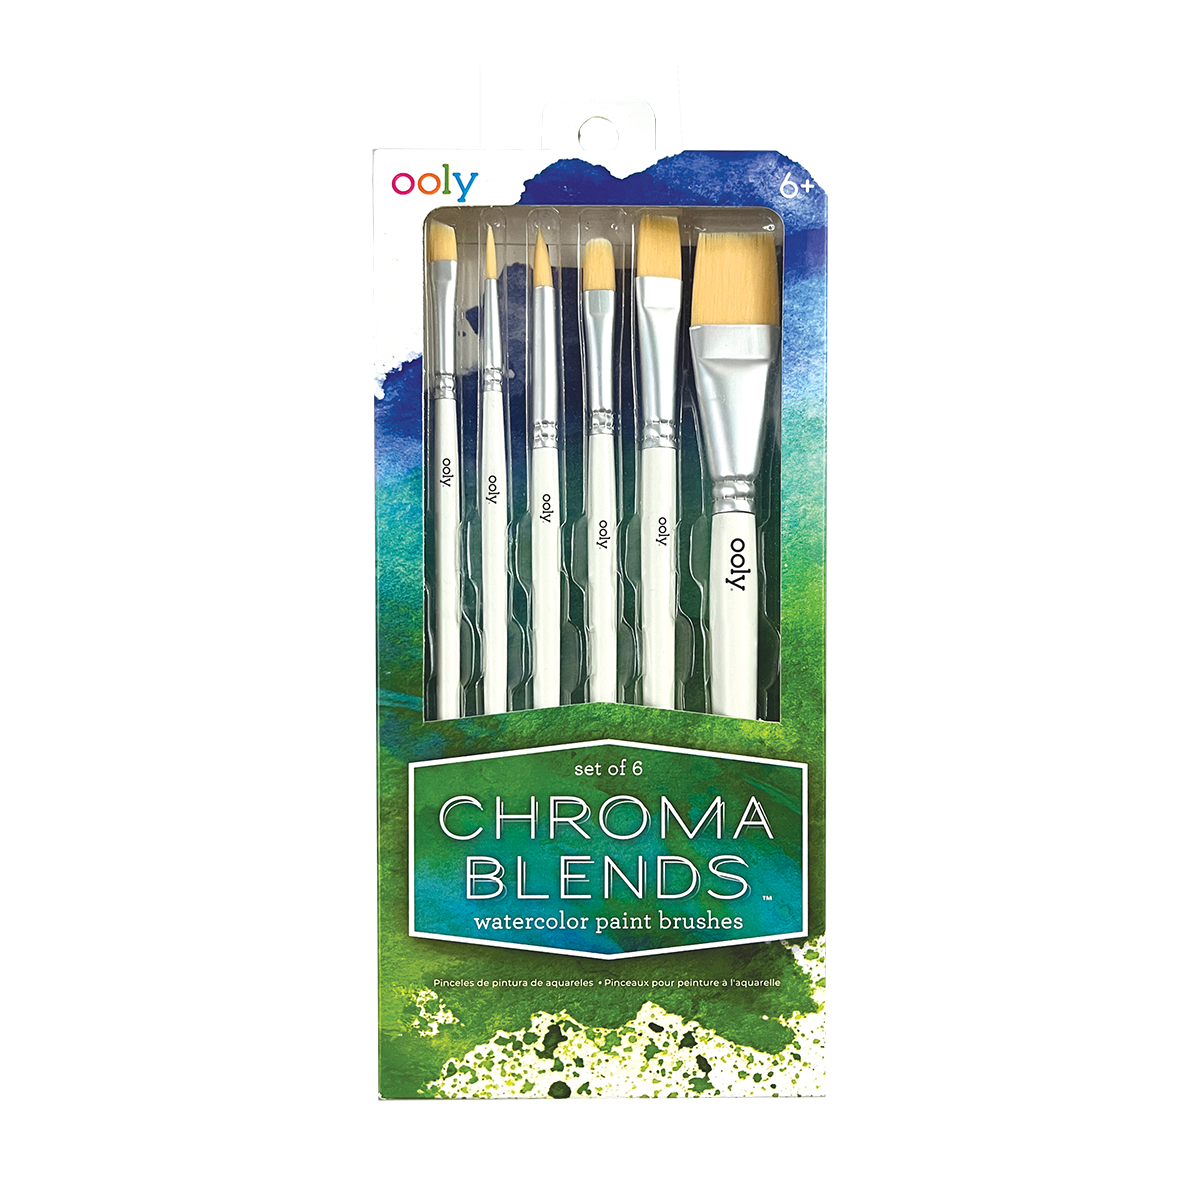 OOLY Chroma Blends Watercolor Paint Brushes in packaging